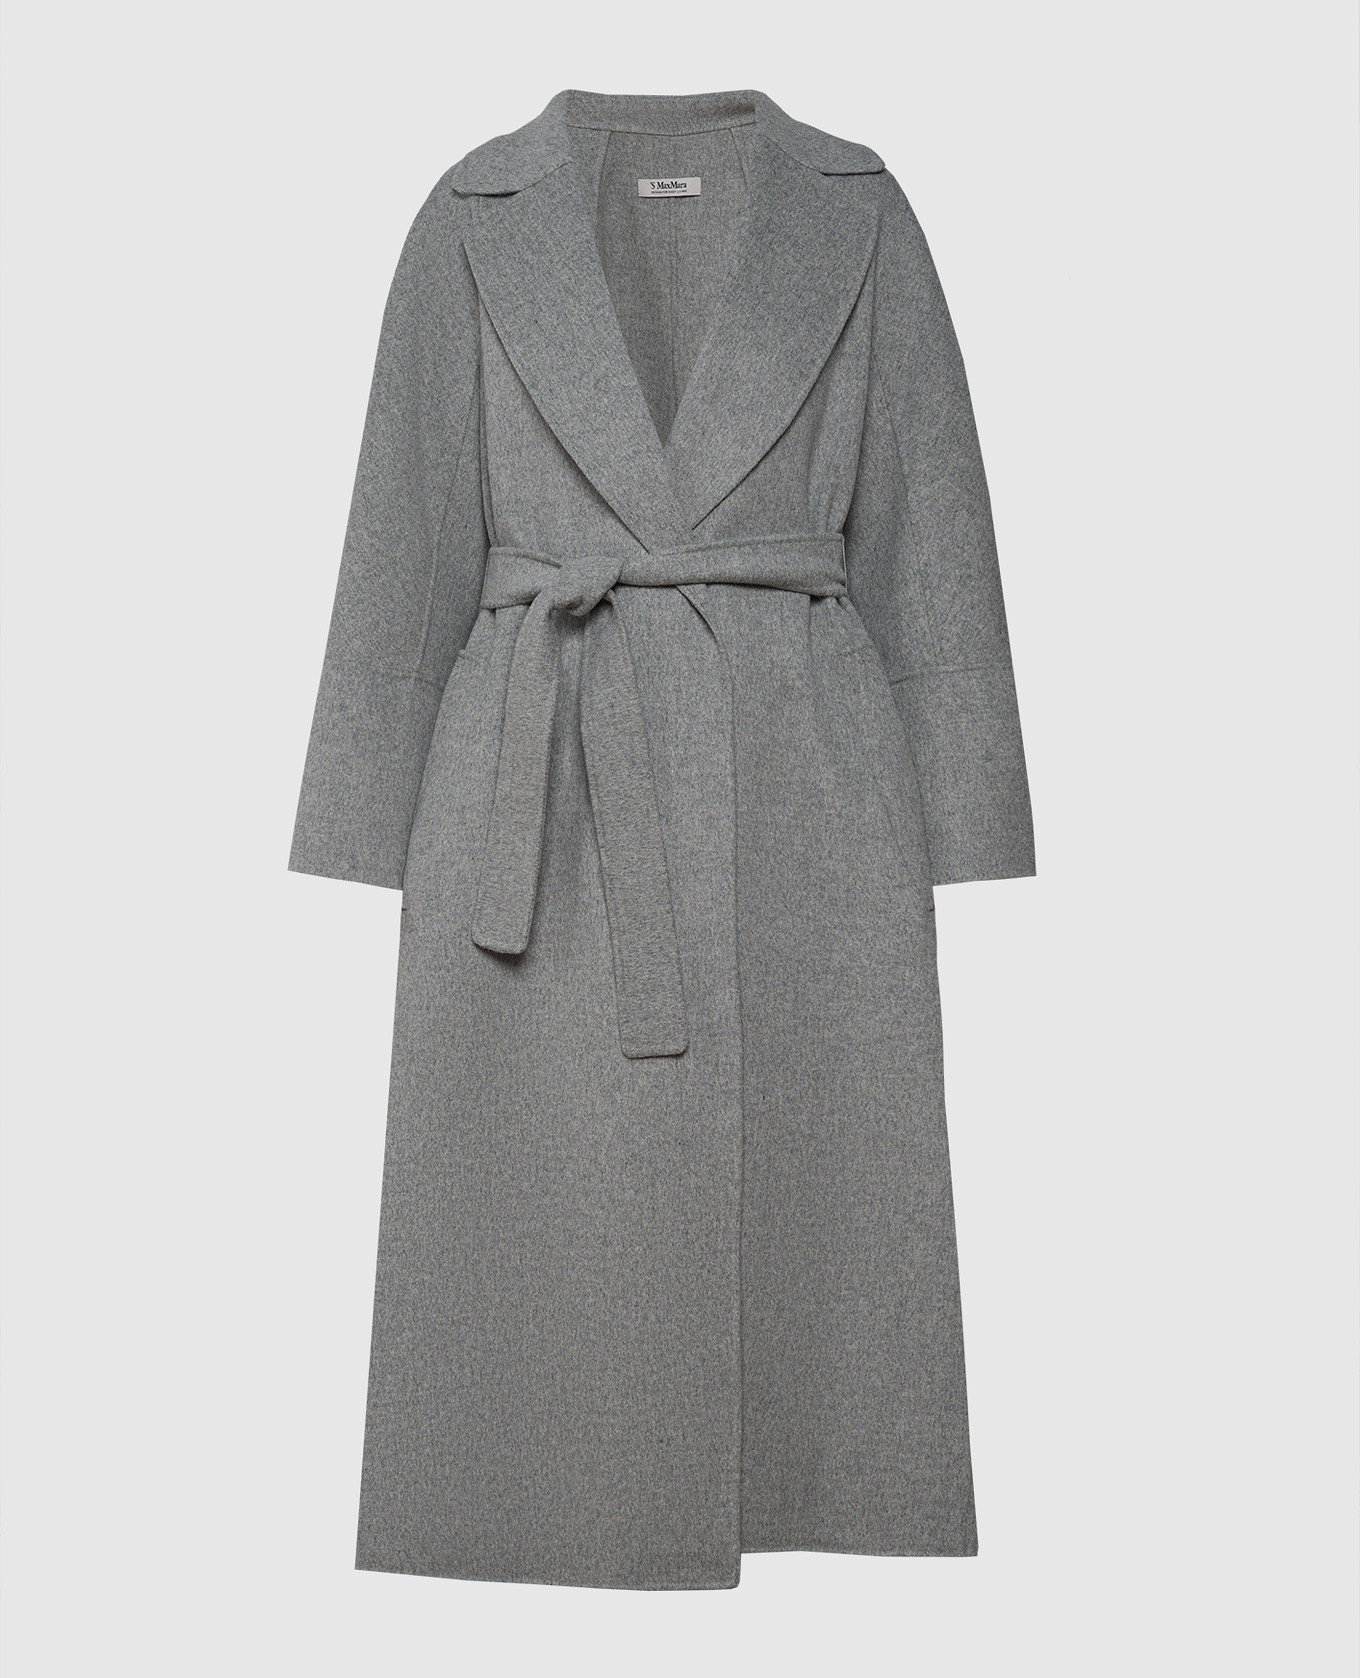 ELISA gray wool coat with logo patch